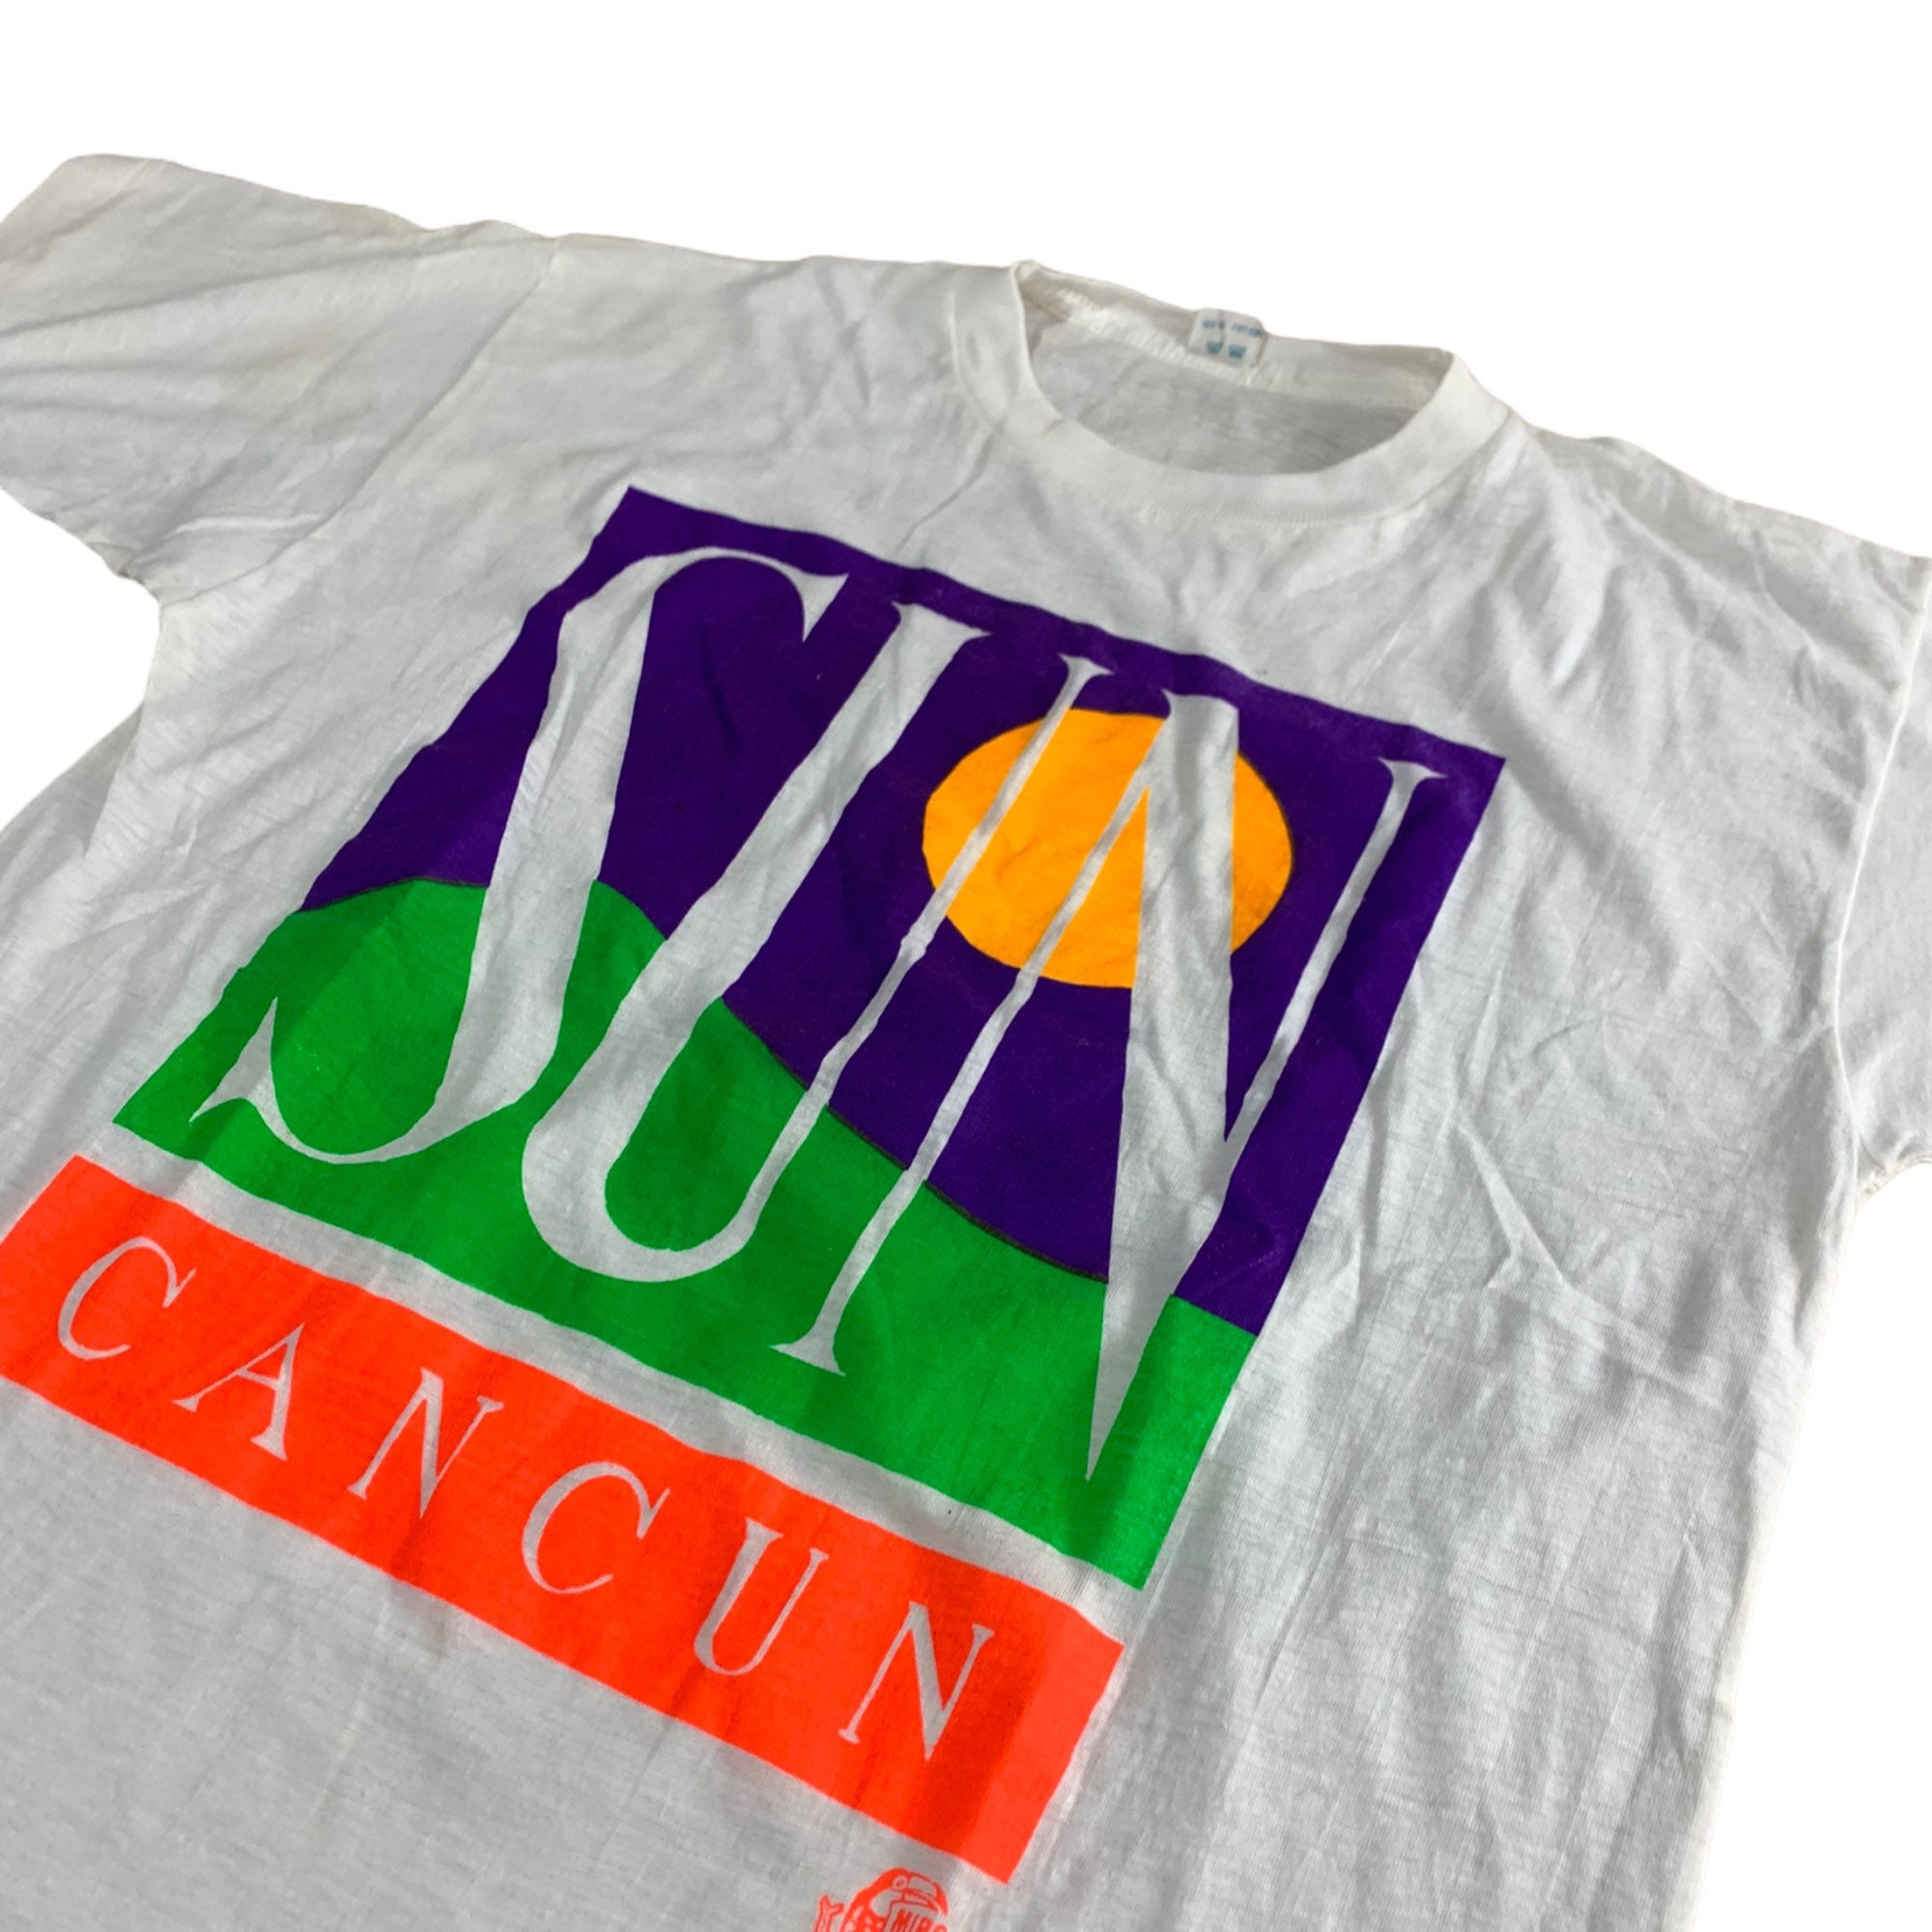 Vintage Cancun Mexico Sun Spell Out T-Shirt / Graphic / | Etsy